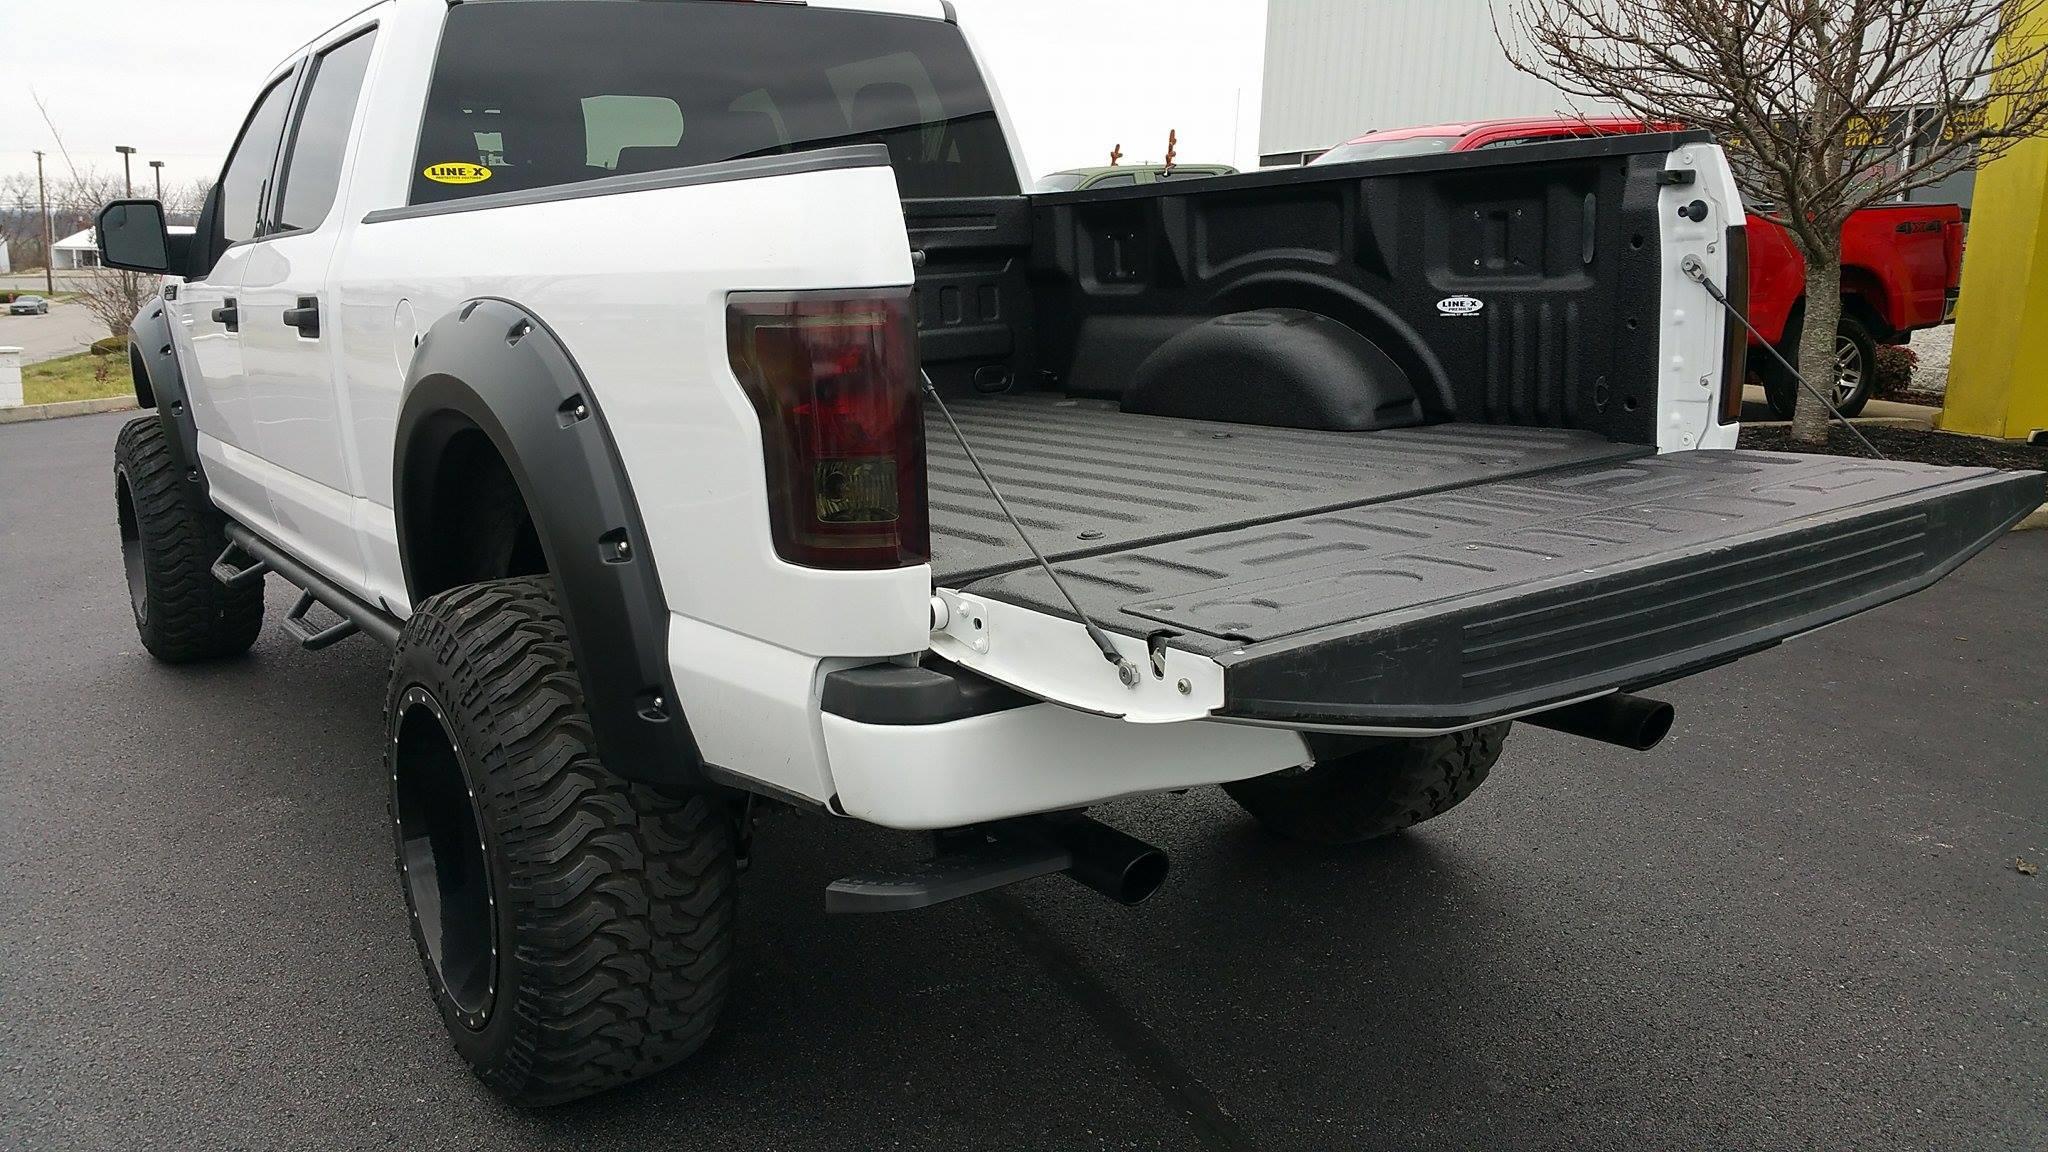 LINE-X of Kentucky Protective Coatings & Truck/SUV Accessories Photo